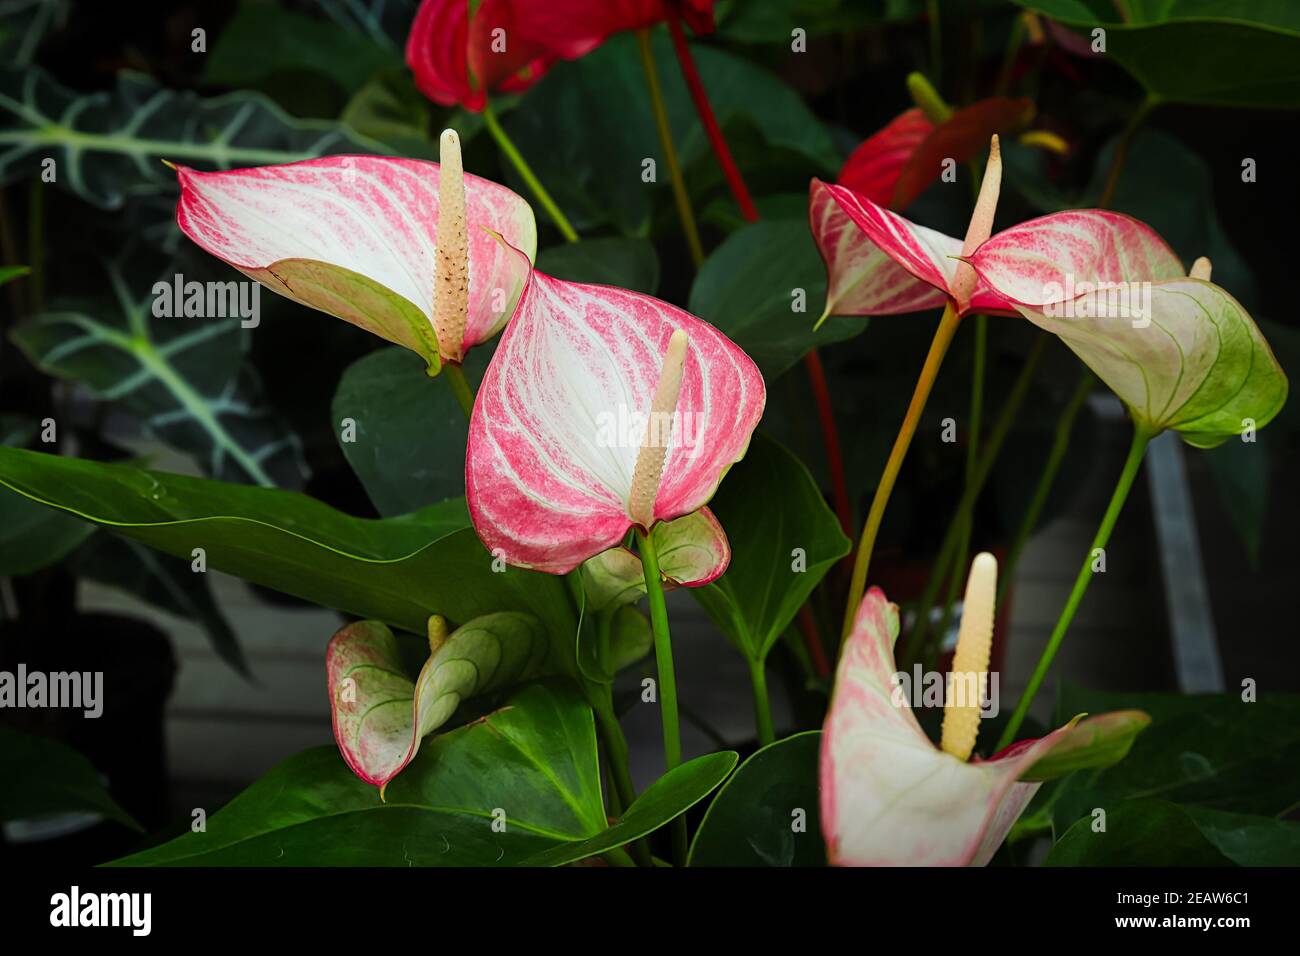 Delicate leaves on a healthy anthurium plant Stock Photo